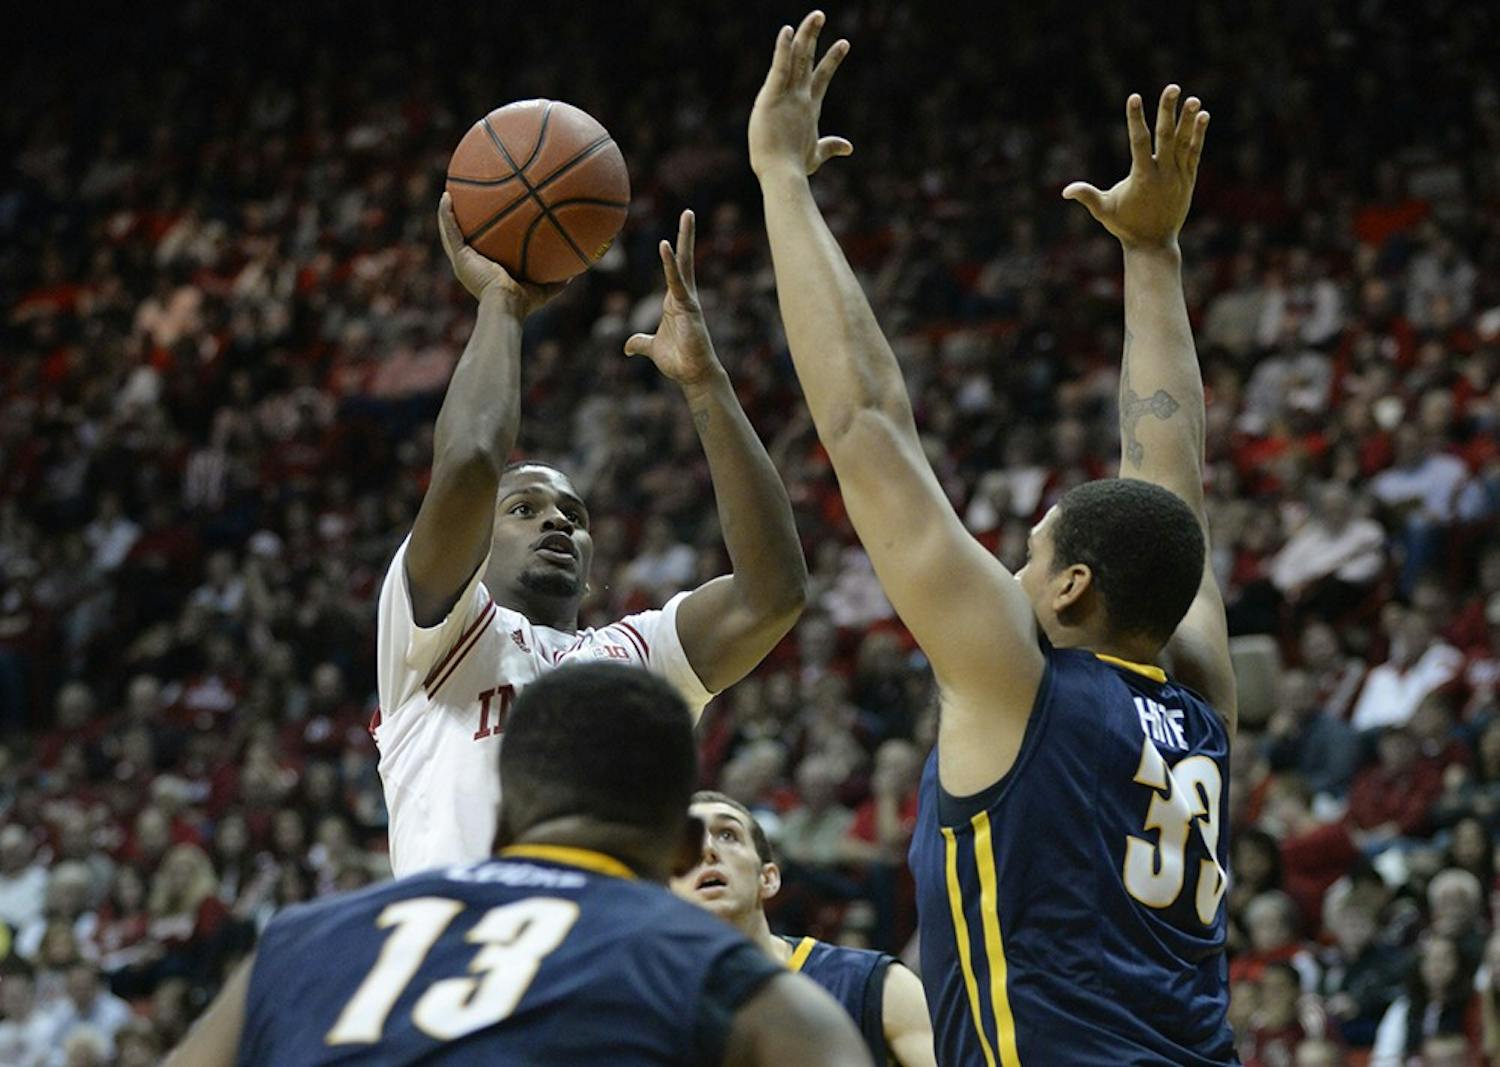 Sophomore guard Stan Robinson goes for two during IU's game against North Carolina-Greensboro on Friday at Assembly Hall.